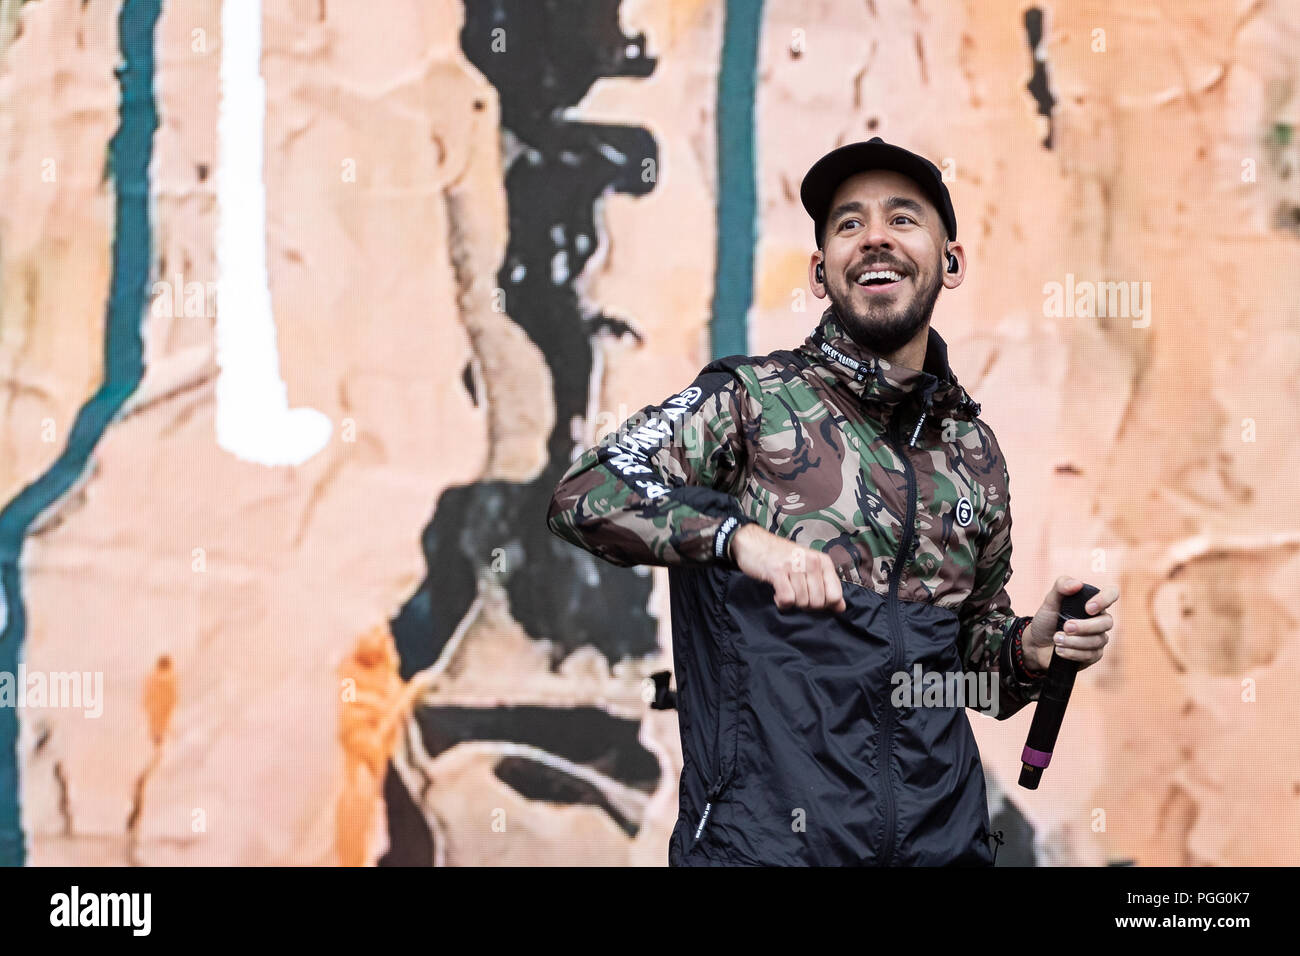 Mike Shinoda performs live on stage at Leeds Festival, UK, 26th August 2018. Stock Photo